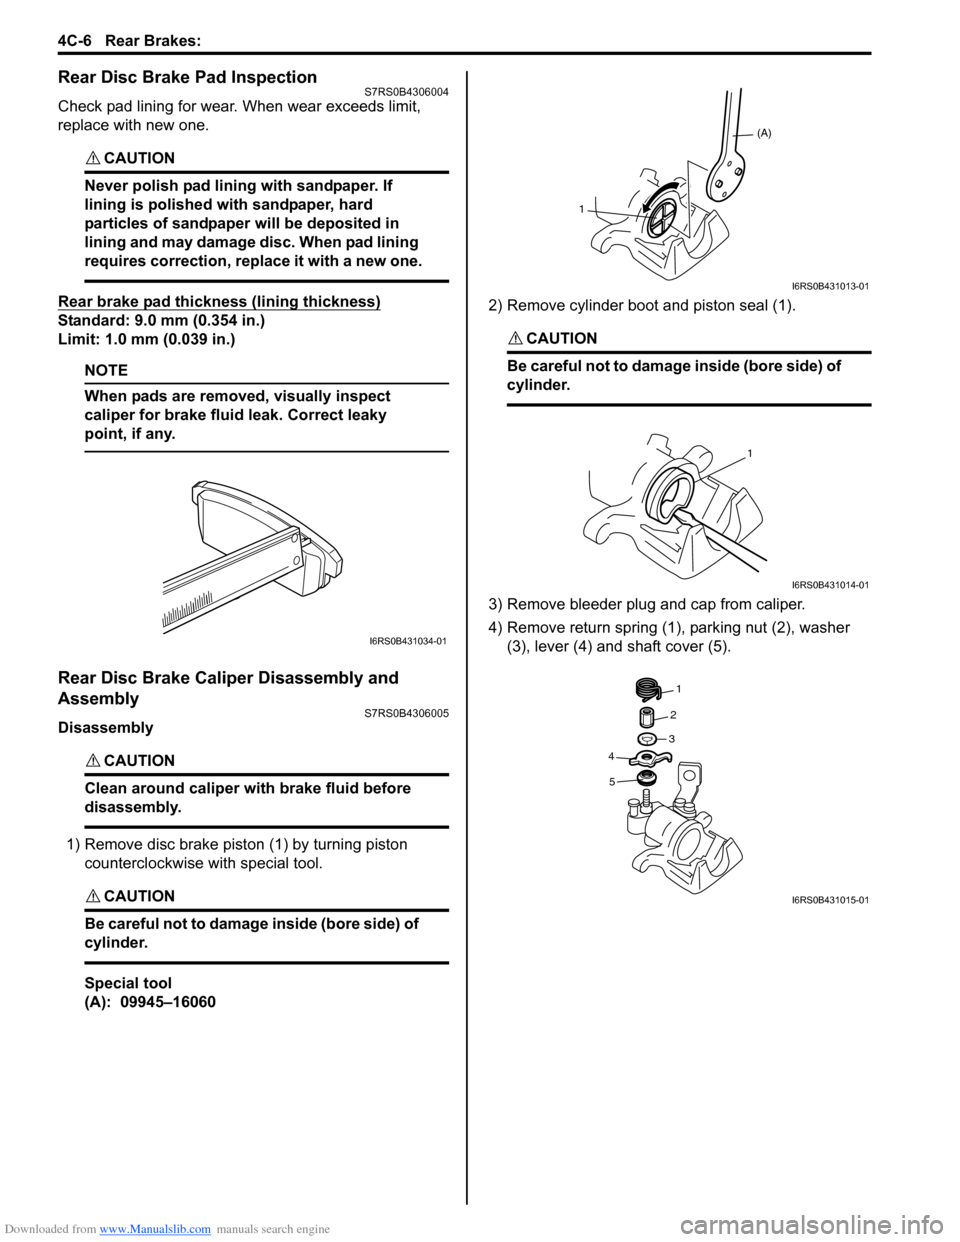 SUZUKI SWIFT 2006 2.G Service Workshop Manual Downloaded from www.Manualslib.com manuals search engine 4C-6 Rear Brakes: 
Rear Disc Brake Pad InspectionS7RS0B4306004
Check pad lining for wear. When wear exceeds limit, 
replace with new one.
CAUTI